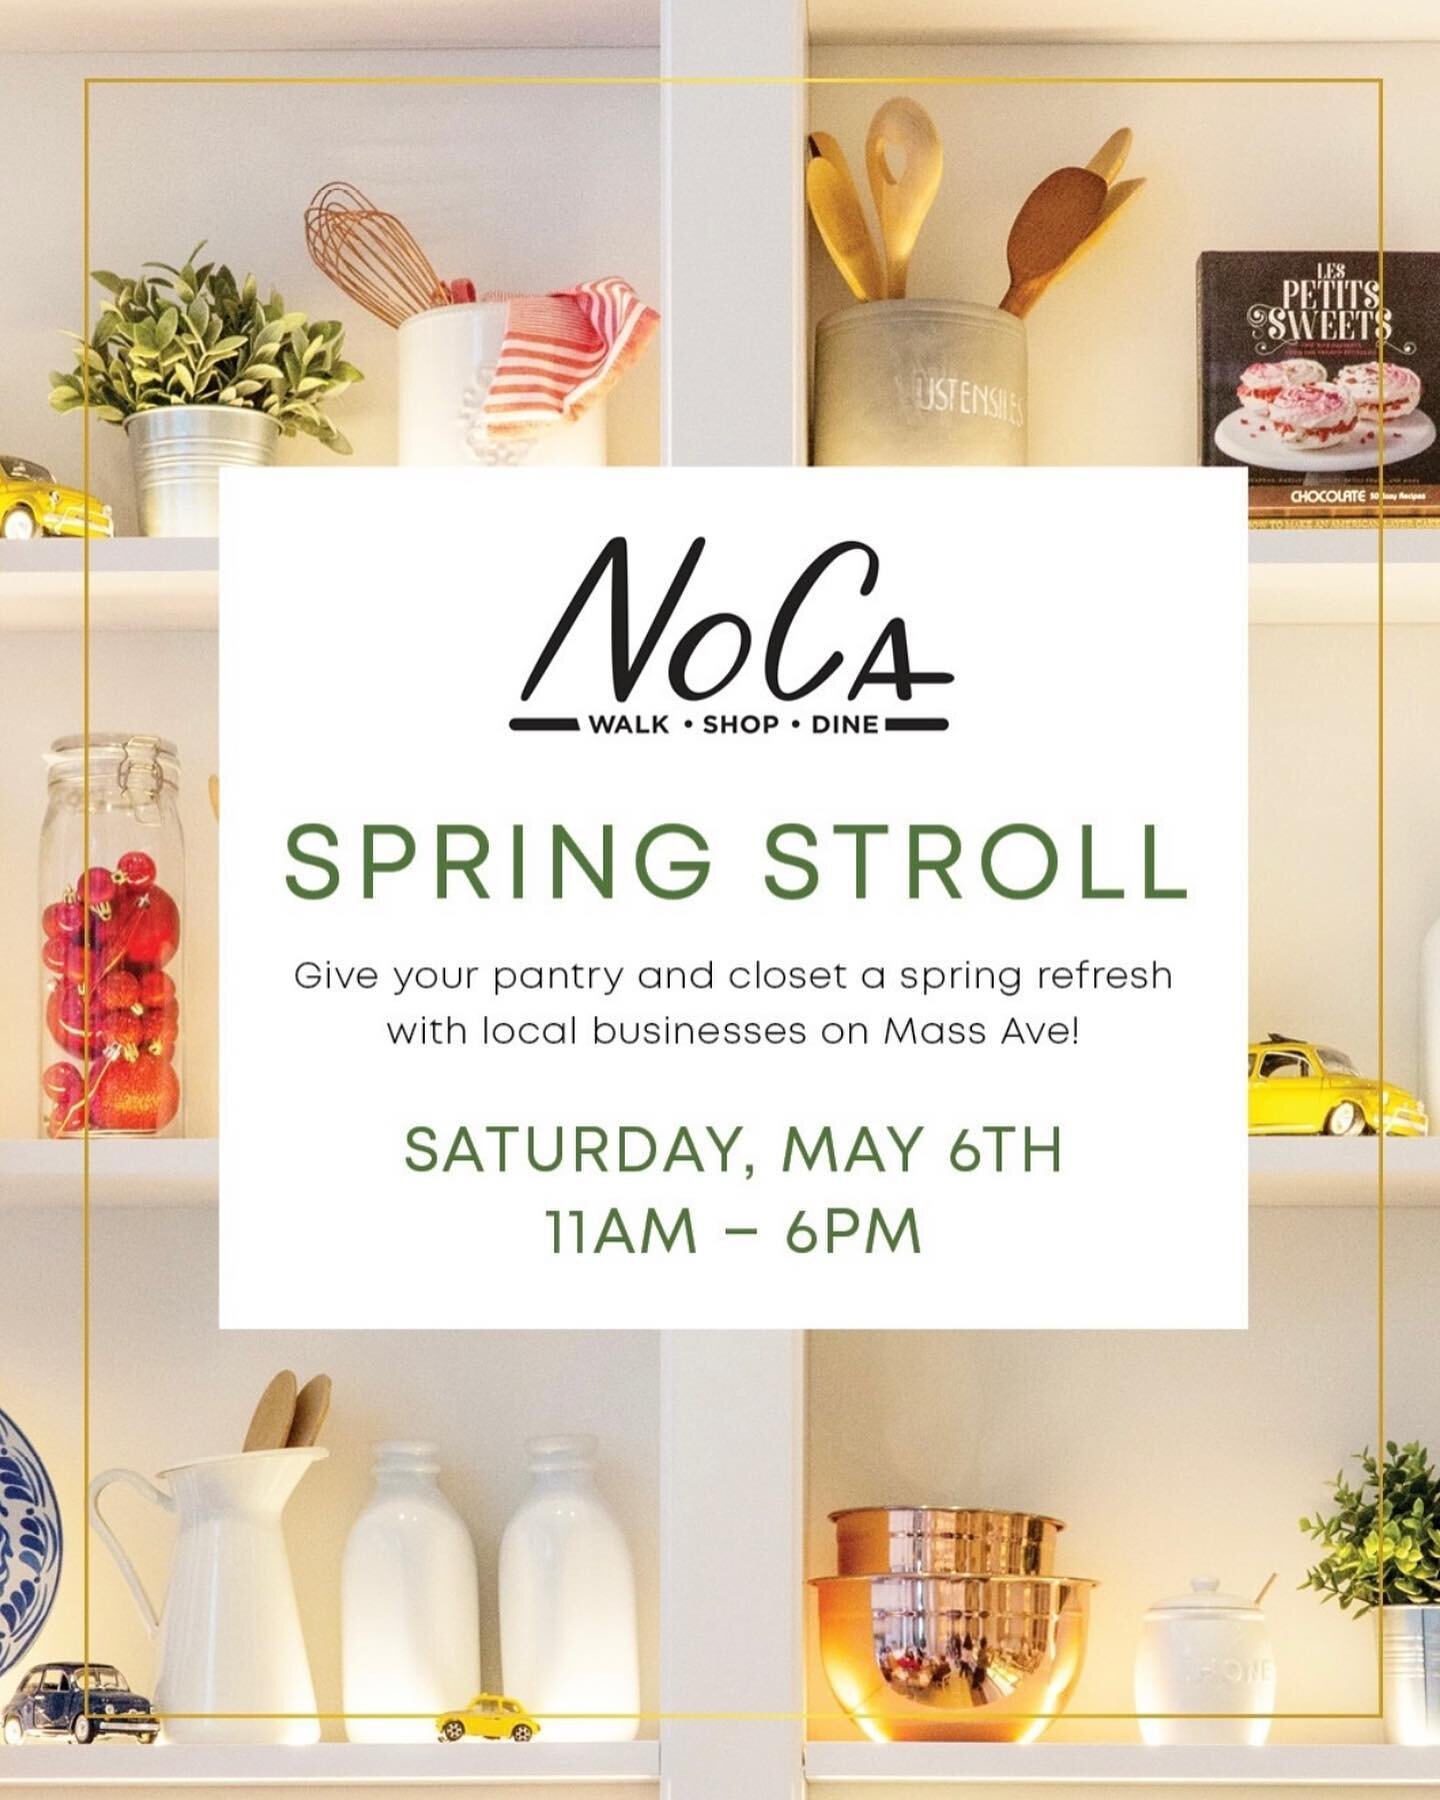 🌸 North Cambridge Spring Stroll 🌸
Join us May 6th for a stroll through North Cambridge to celebrate and give your pantry 👩&zwj;🍳 and closet 👗 a spring refresh. We will have @sweetbotanicalbakes serving up some of her delicious shortbread cookies